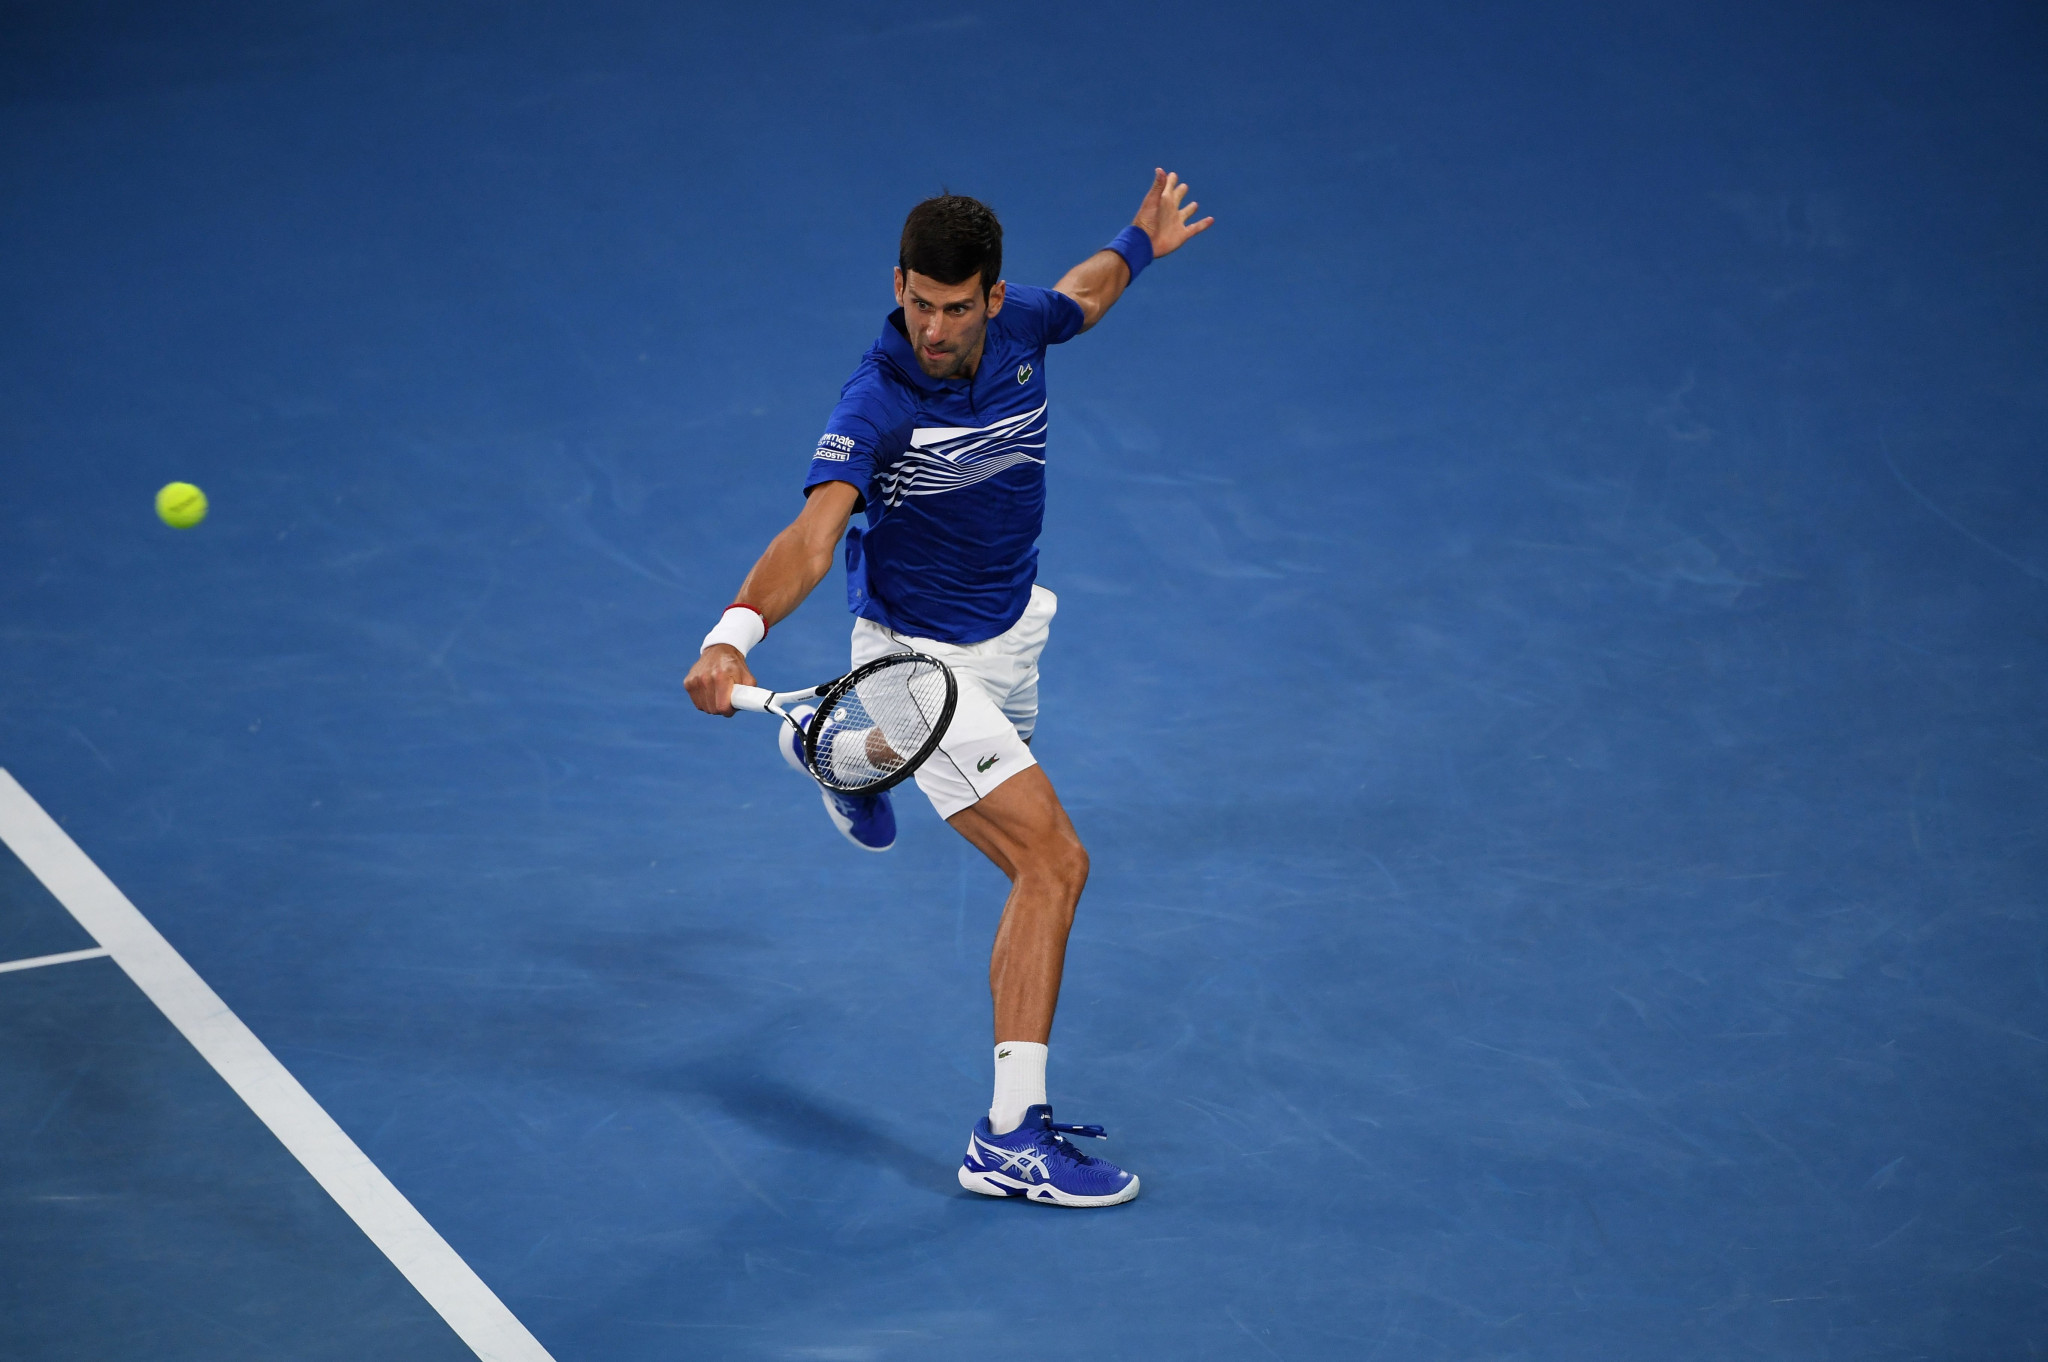 Novak Djokovic reached the semi-final of the men's draw after opponent Kei Nishikori retired in the second set ©Getty Images